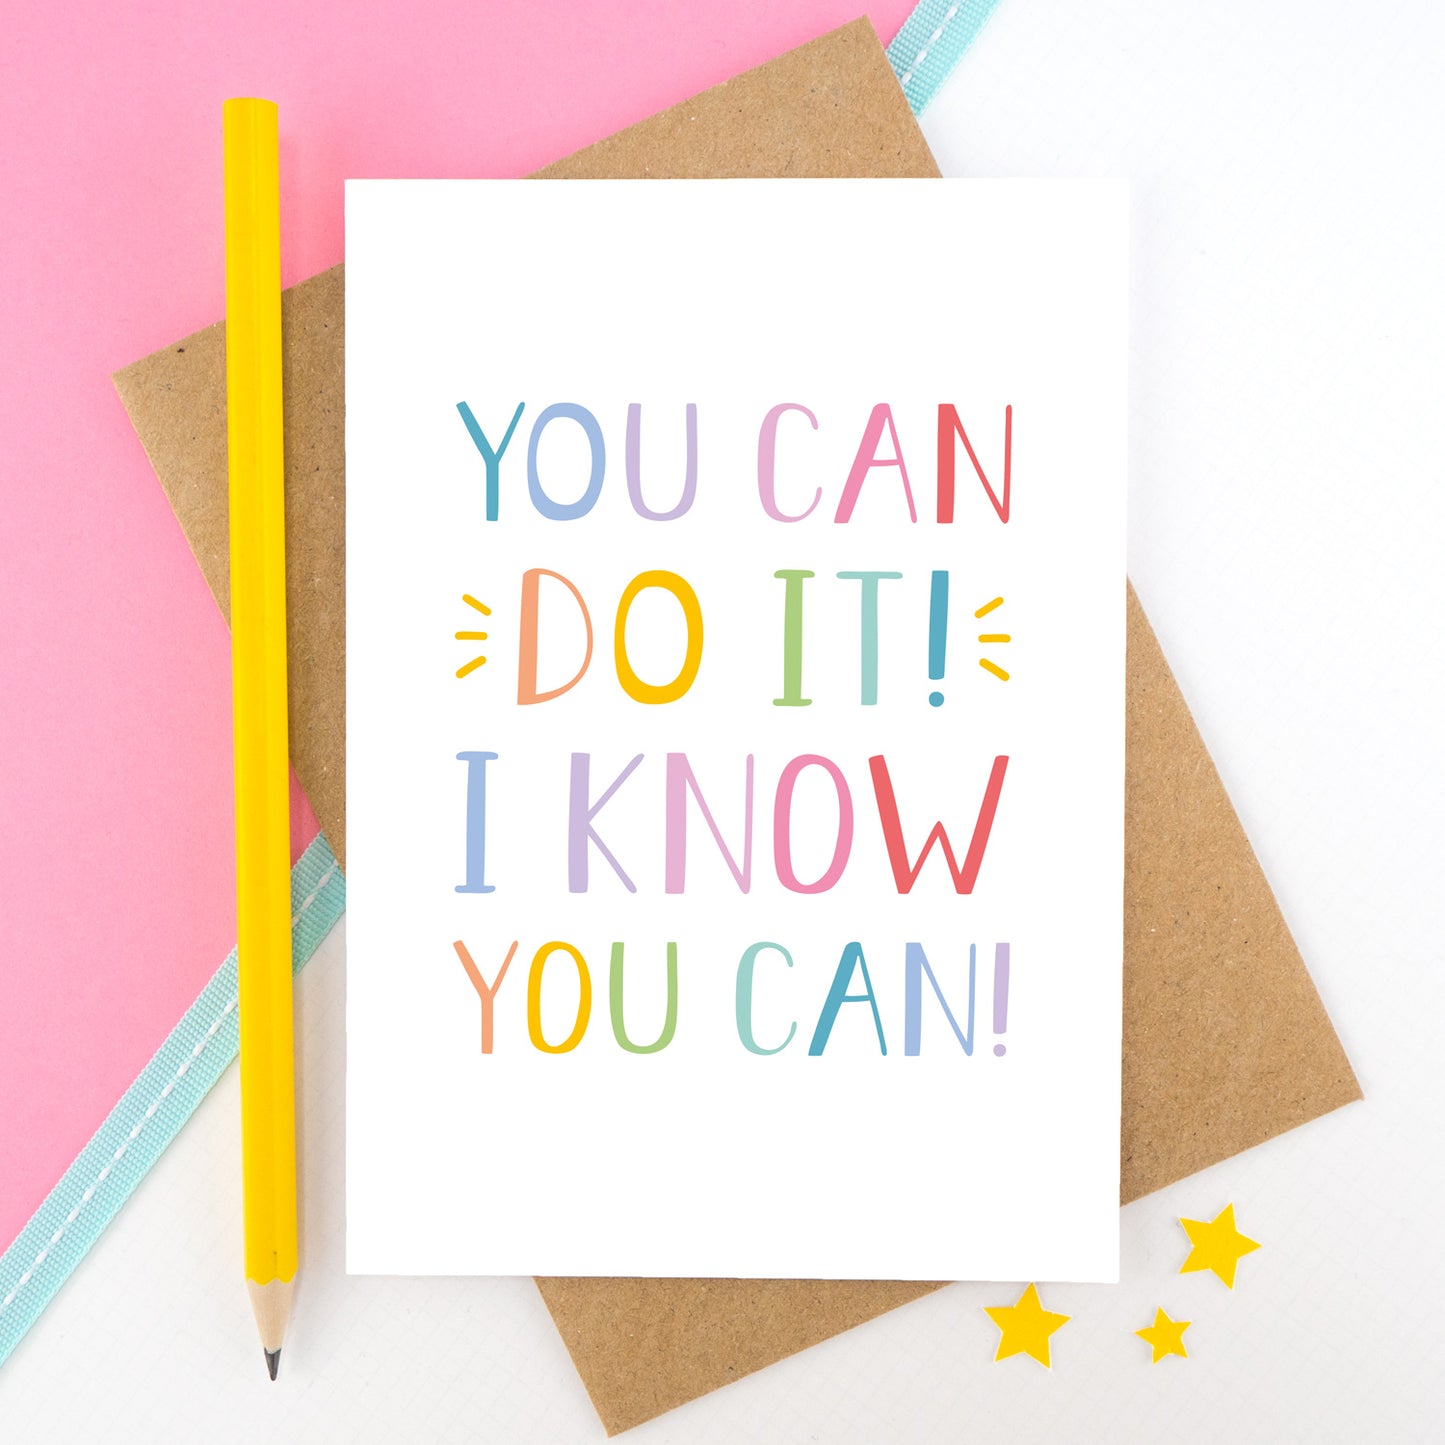 You can do it, I know you can! - Positive encouragement card photographed on a pick and white background separated with a teal ribbon. Also featuring a yellow pencil for scale. This version is in a rainbow colour palette.